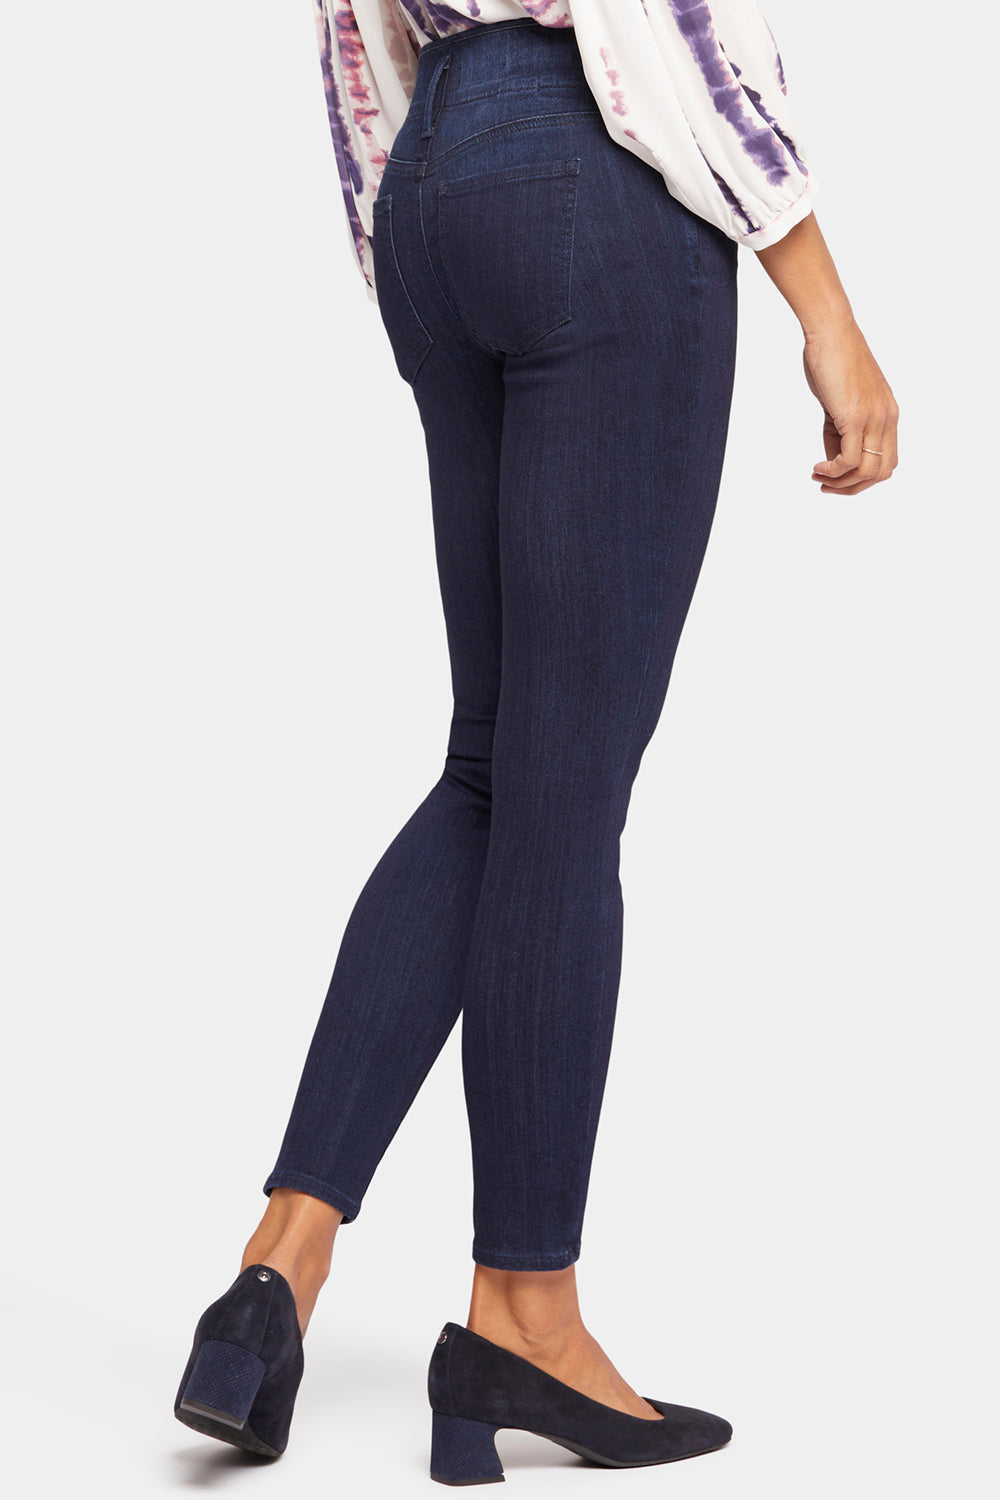 NYDJ Ami Skinny Jeans In Tall In Sure Stretch® Denim With 33